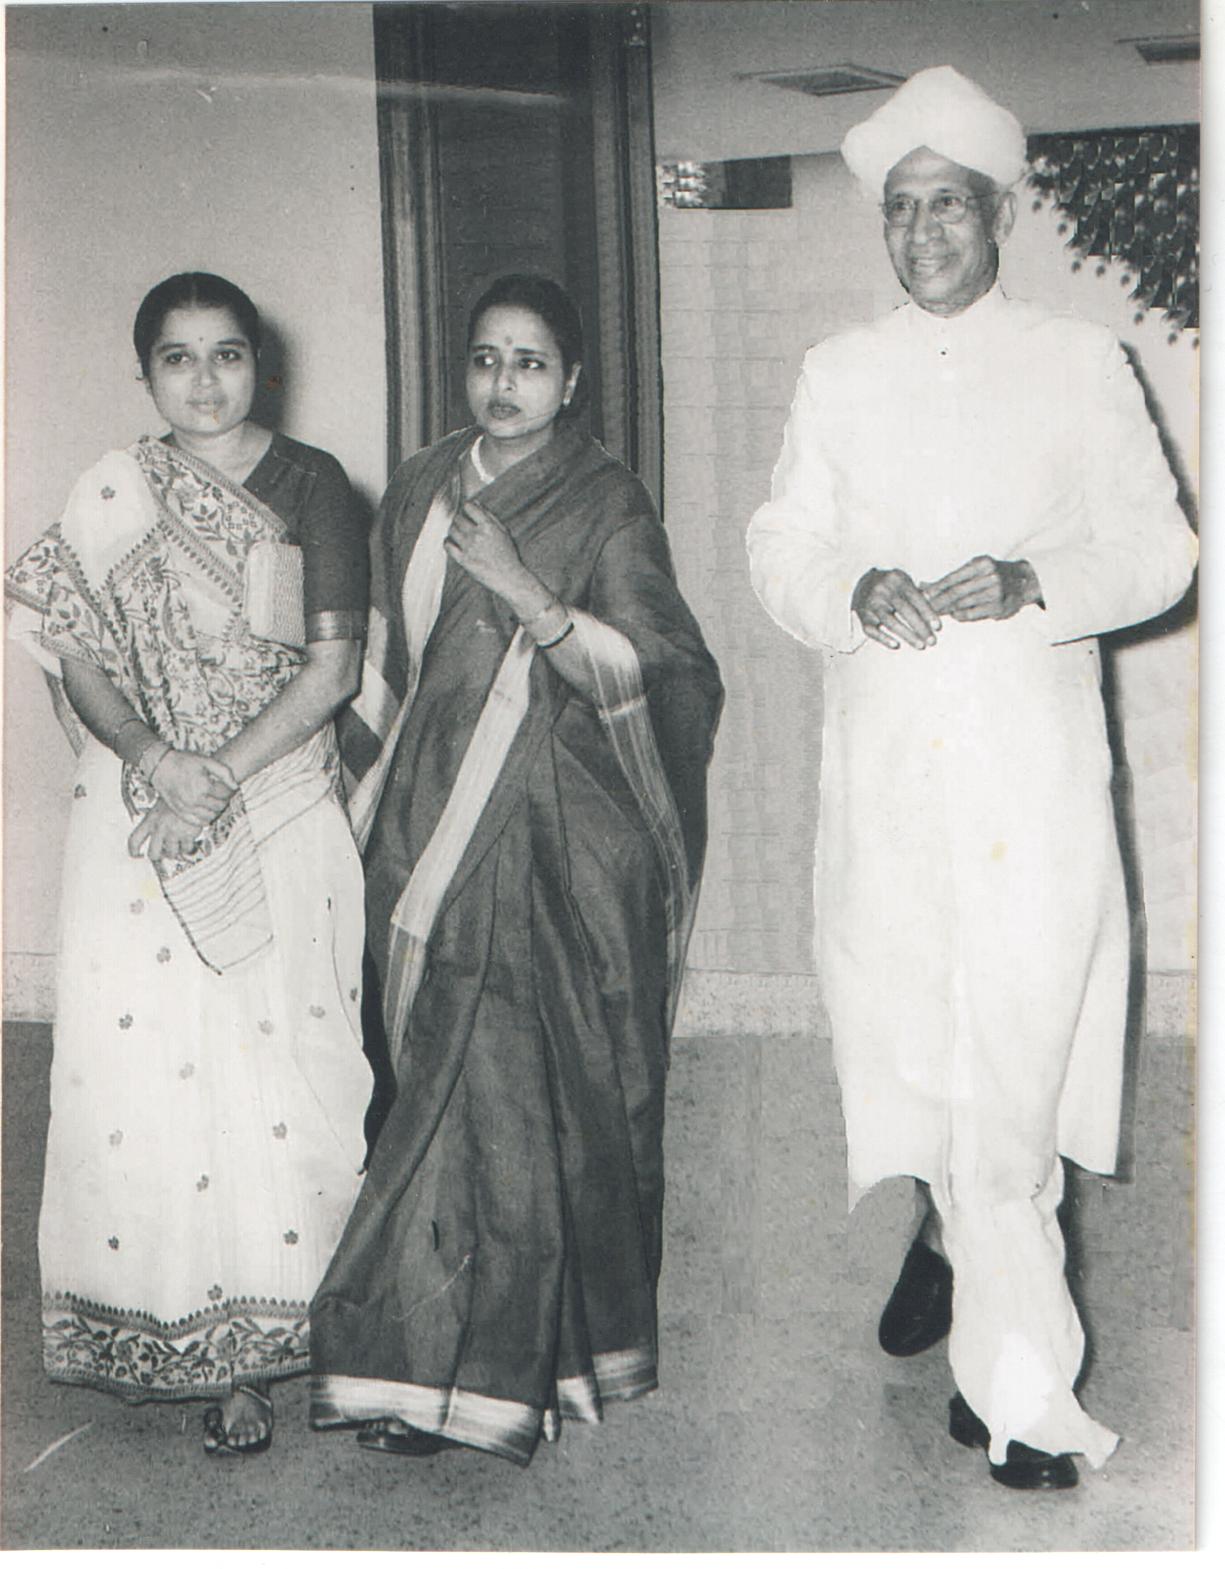 President of the Indian National Theatre (INT) Vidyaben Shah with President of India Dr Radhakrishnan and Smt Shiela Bharat Ram at the INT in 1963